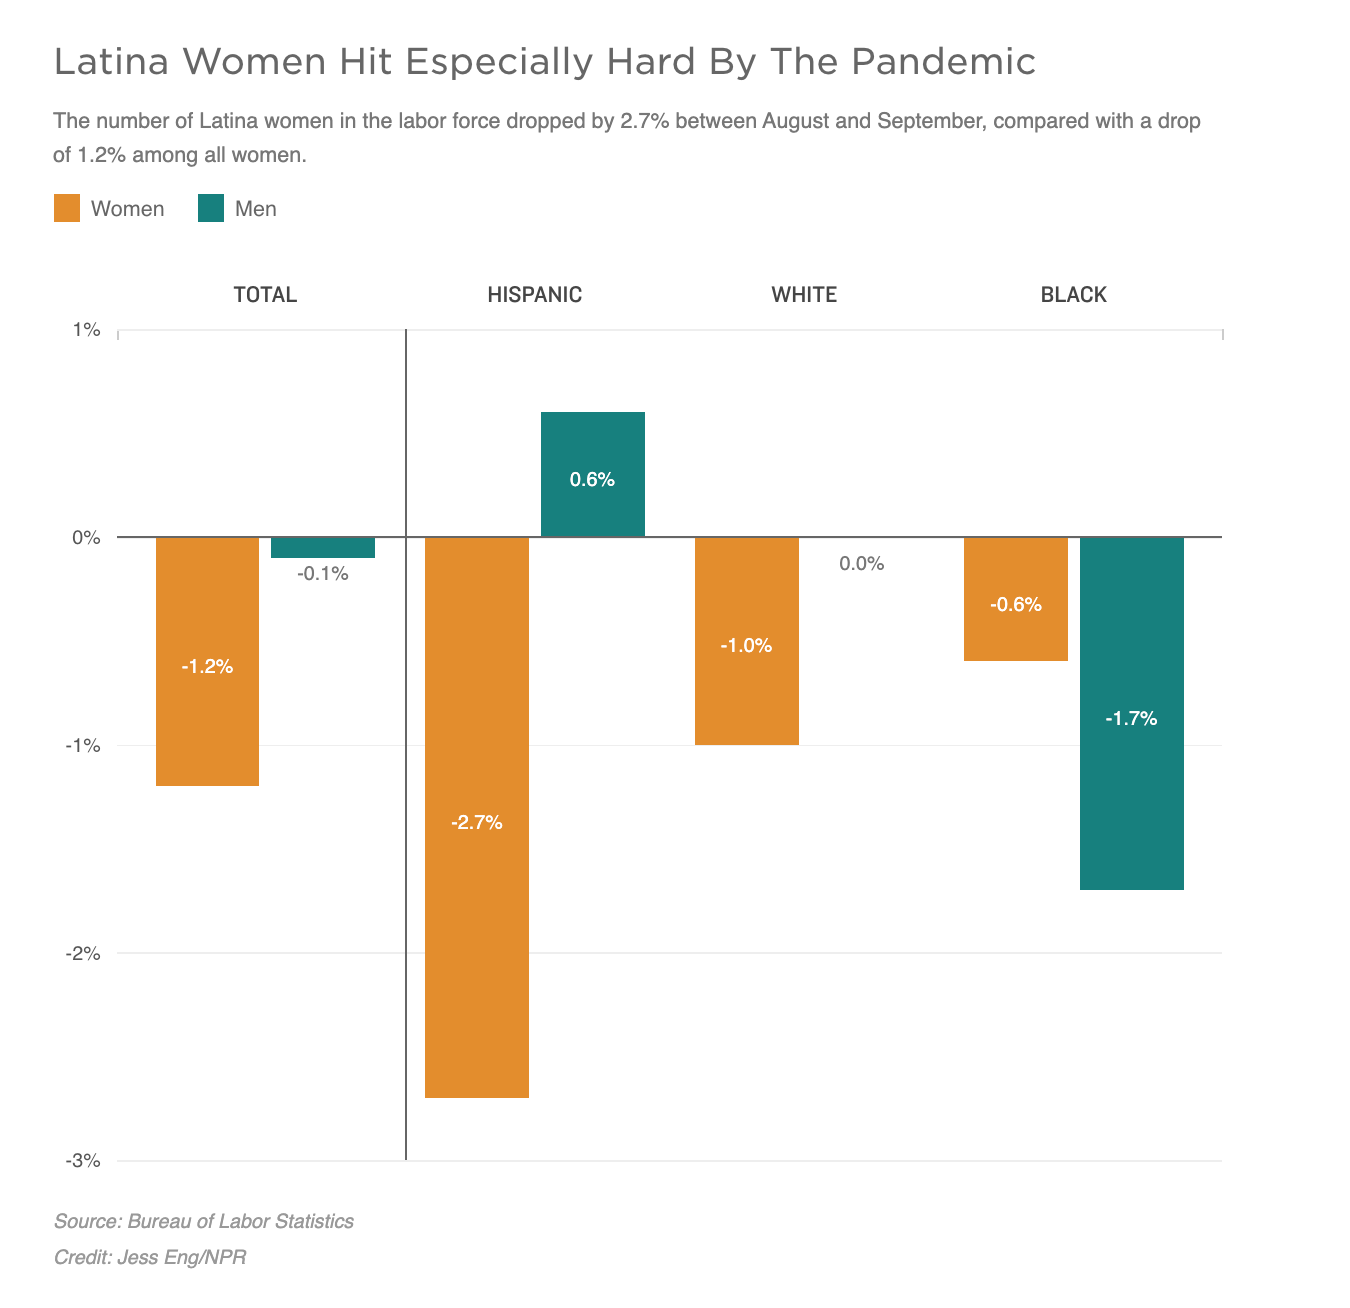 Illustration showing the number of Latina women in the labor force dropped by 2.7% between August and September, compared with a drop of 1.2% among all women.